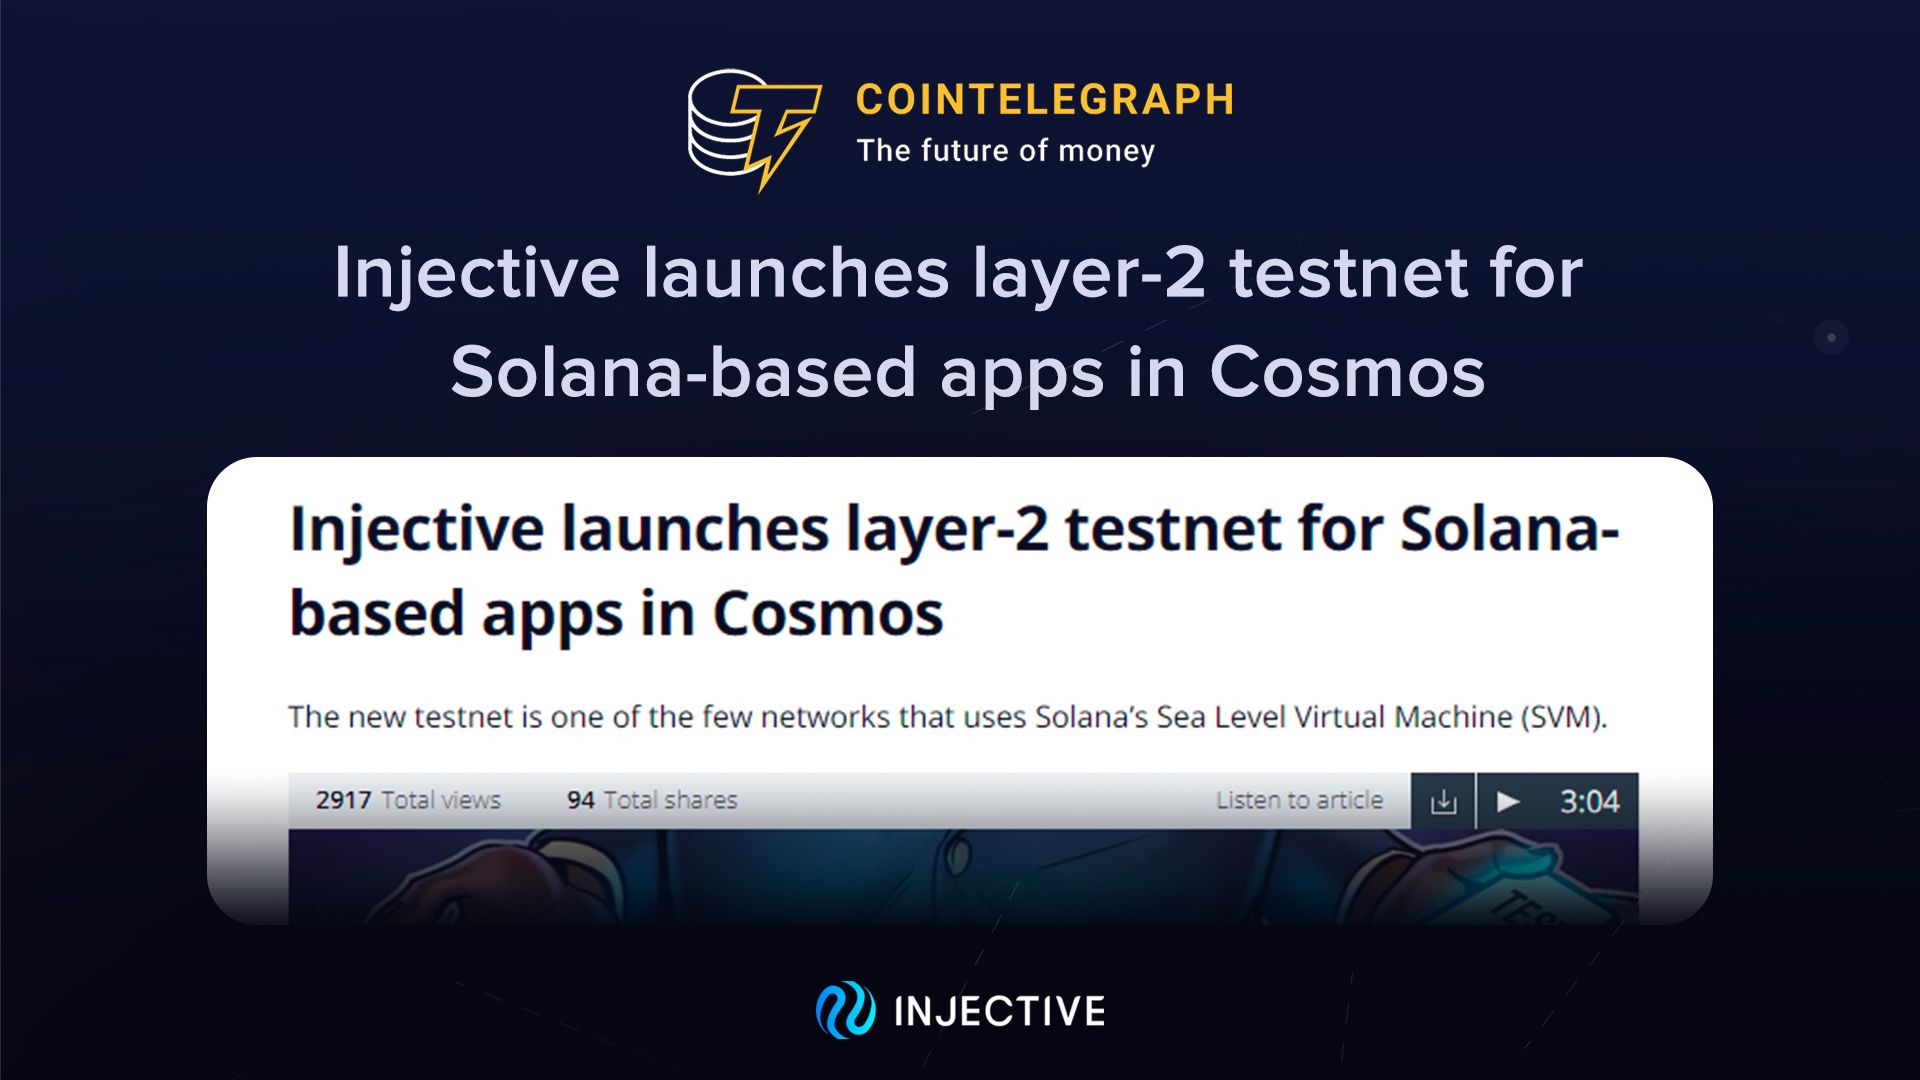 (CoinTelegraph) Injective launches layer-2 testnet for Solana-based apps in Cosmos